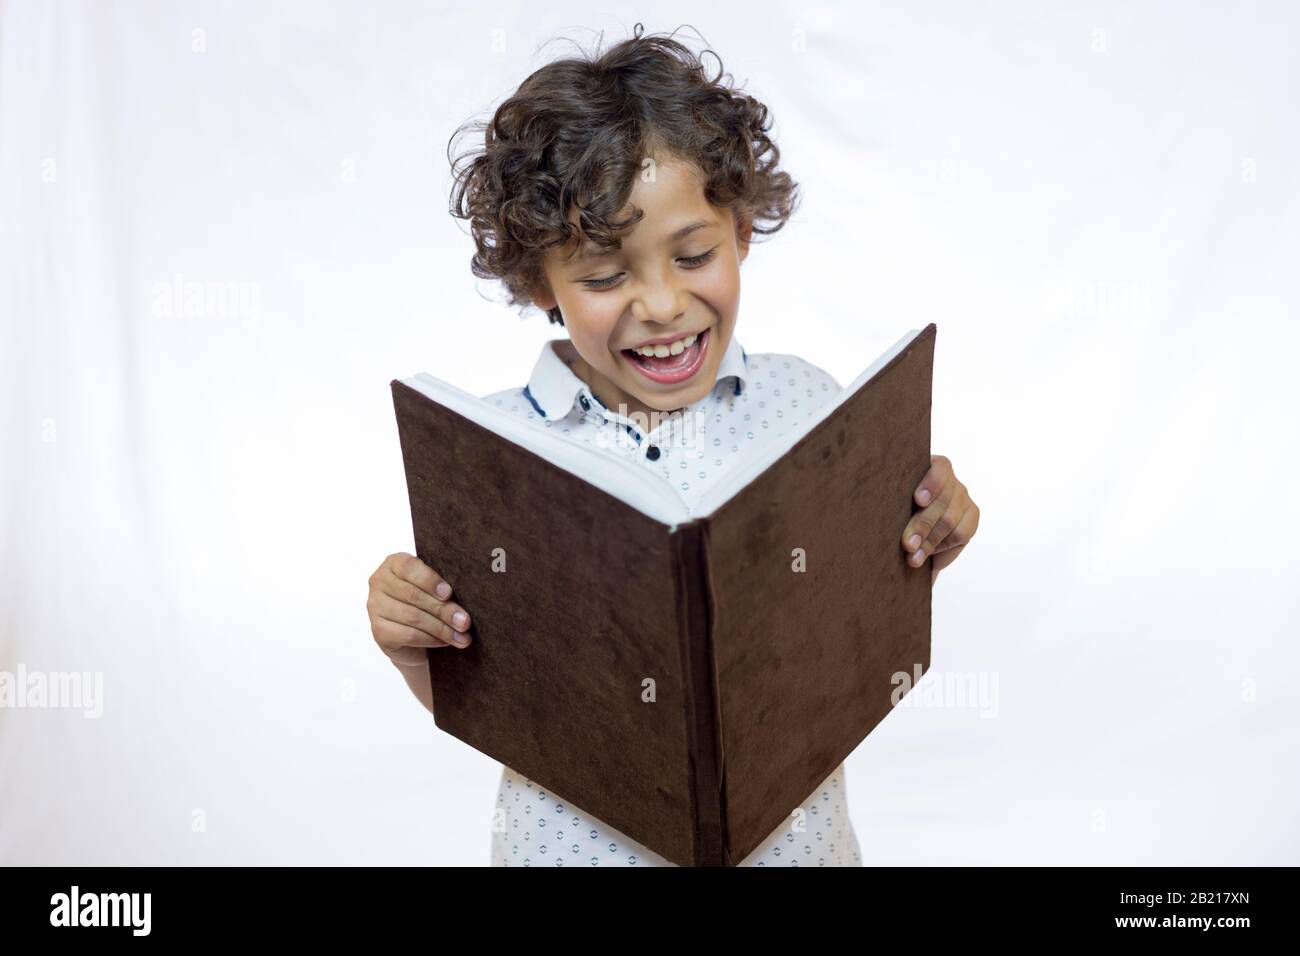 Smiling boy between 8 and 9 years old holding a book while reading it and standing against white background Stock Photo